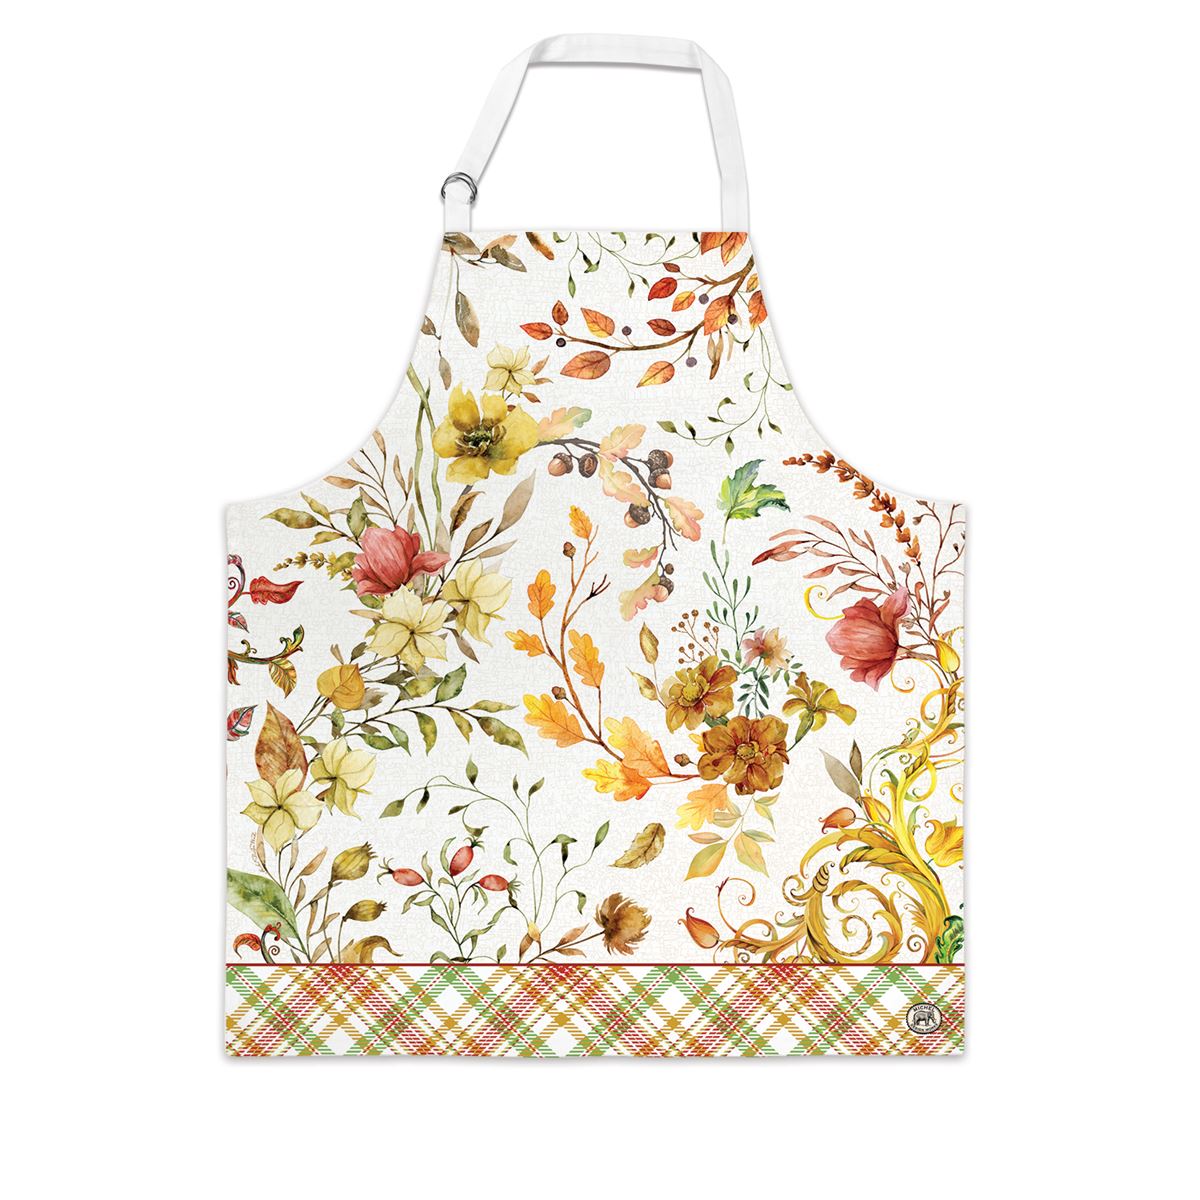 Fall Leaves & Flowers Apron by Michel Design Works